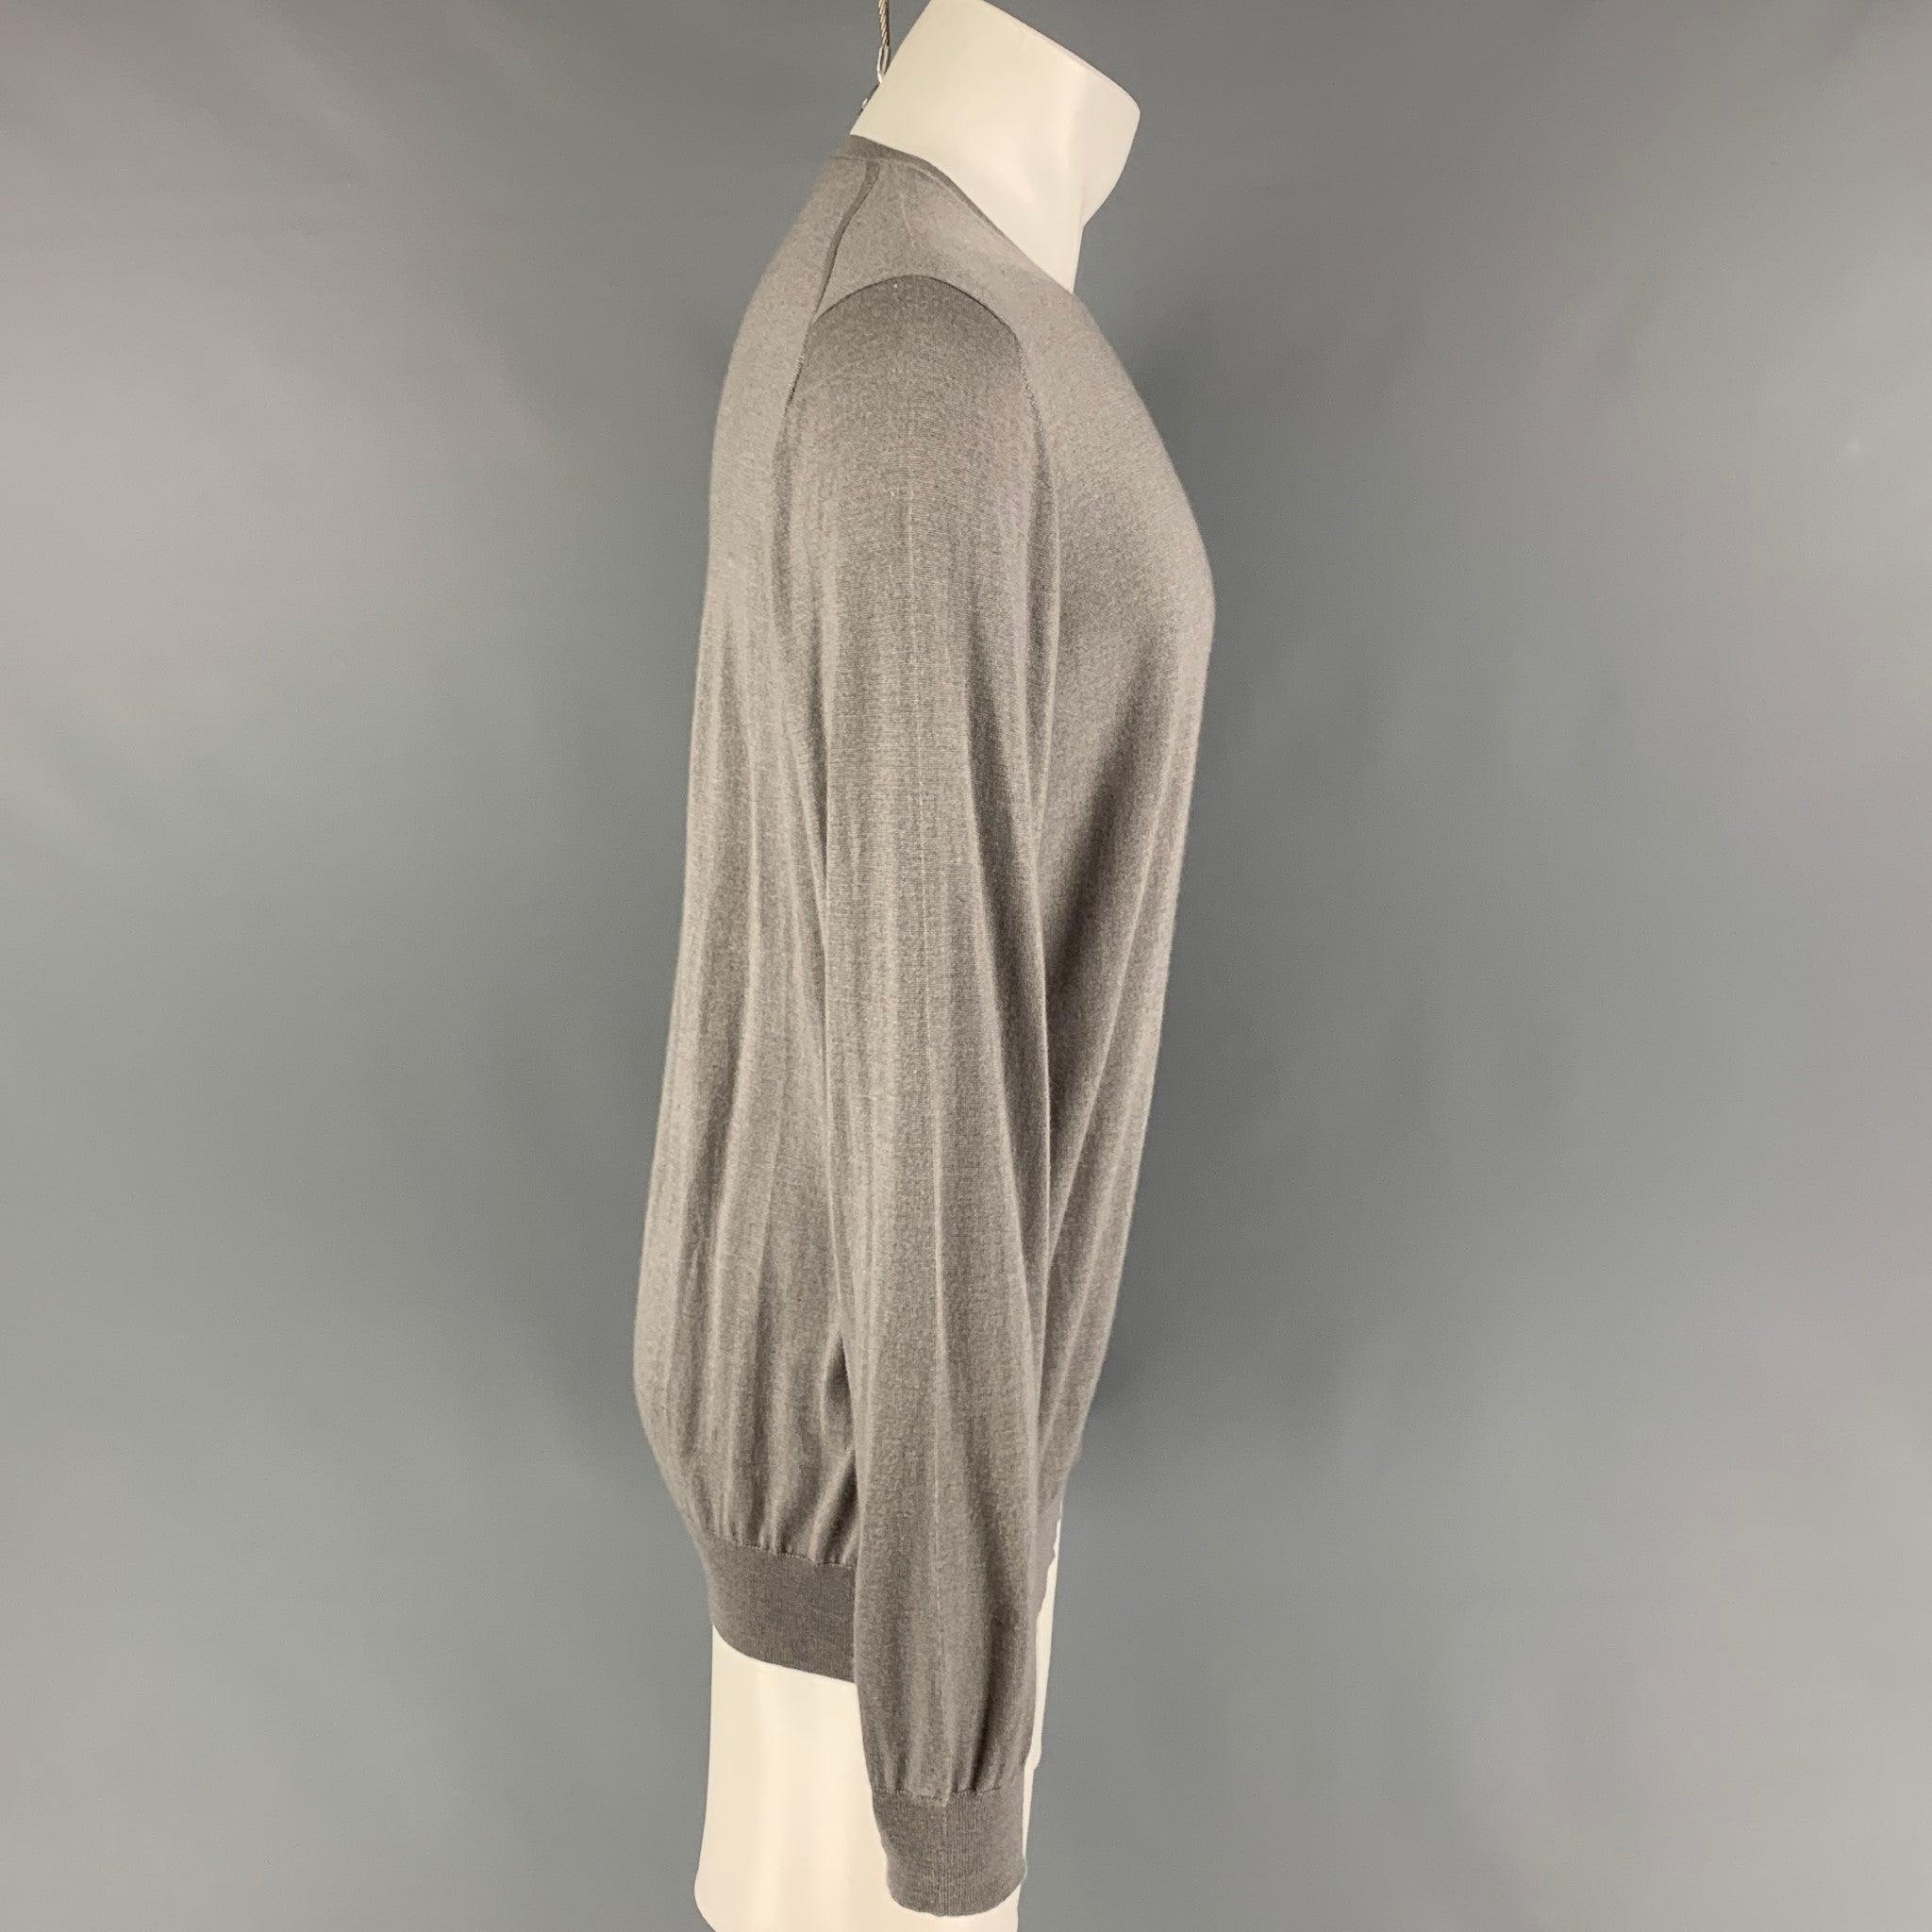 PRADA pullover comes in a grey cashmere / silk featuring a crew-neck. Made in Italy.
Very Good
Pre-Owned Condition. 

Marked:   54 

Measurements: 
 
Shoulder: 18.5 inches  Chest: 44 inches  Sleeve: 28.5 inches  Length: 29.5 inches 
  
  
